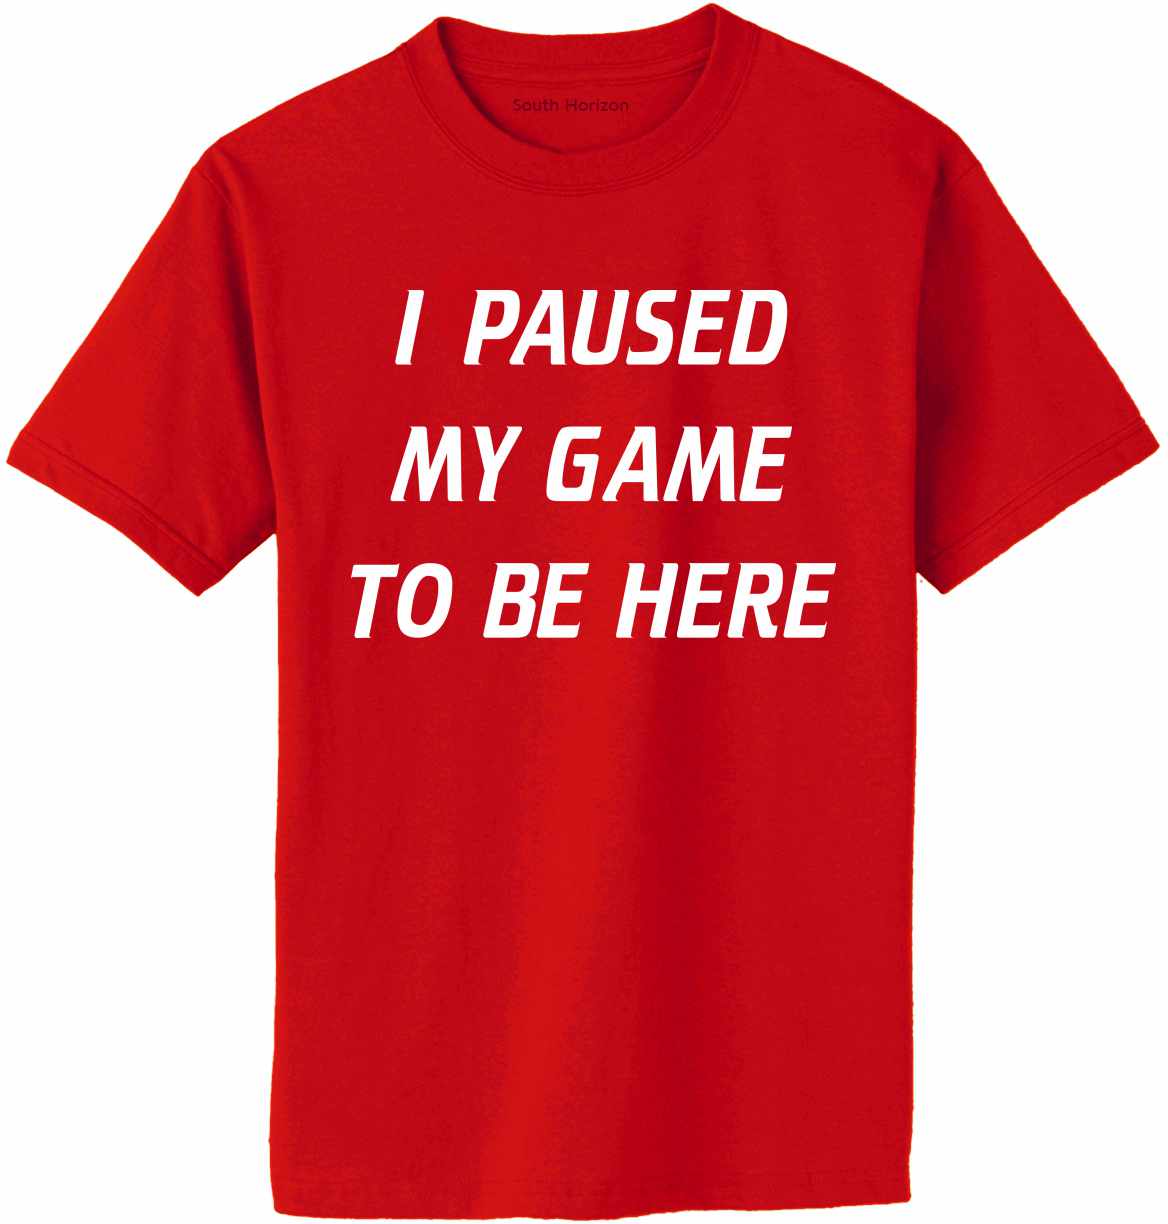 I Paused My Game to Be Here Adult T-Shirt (#970-1)